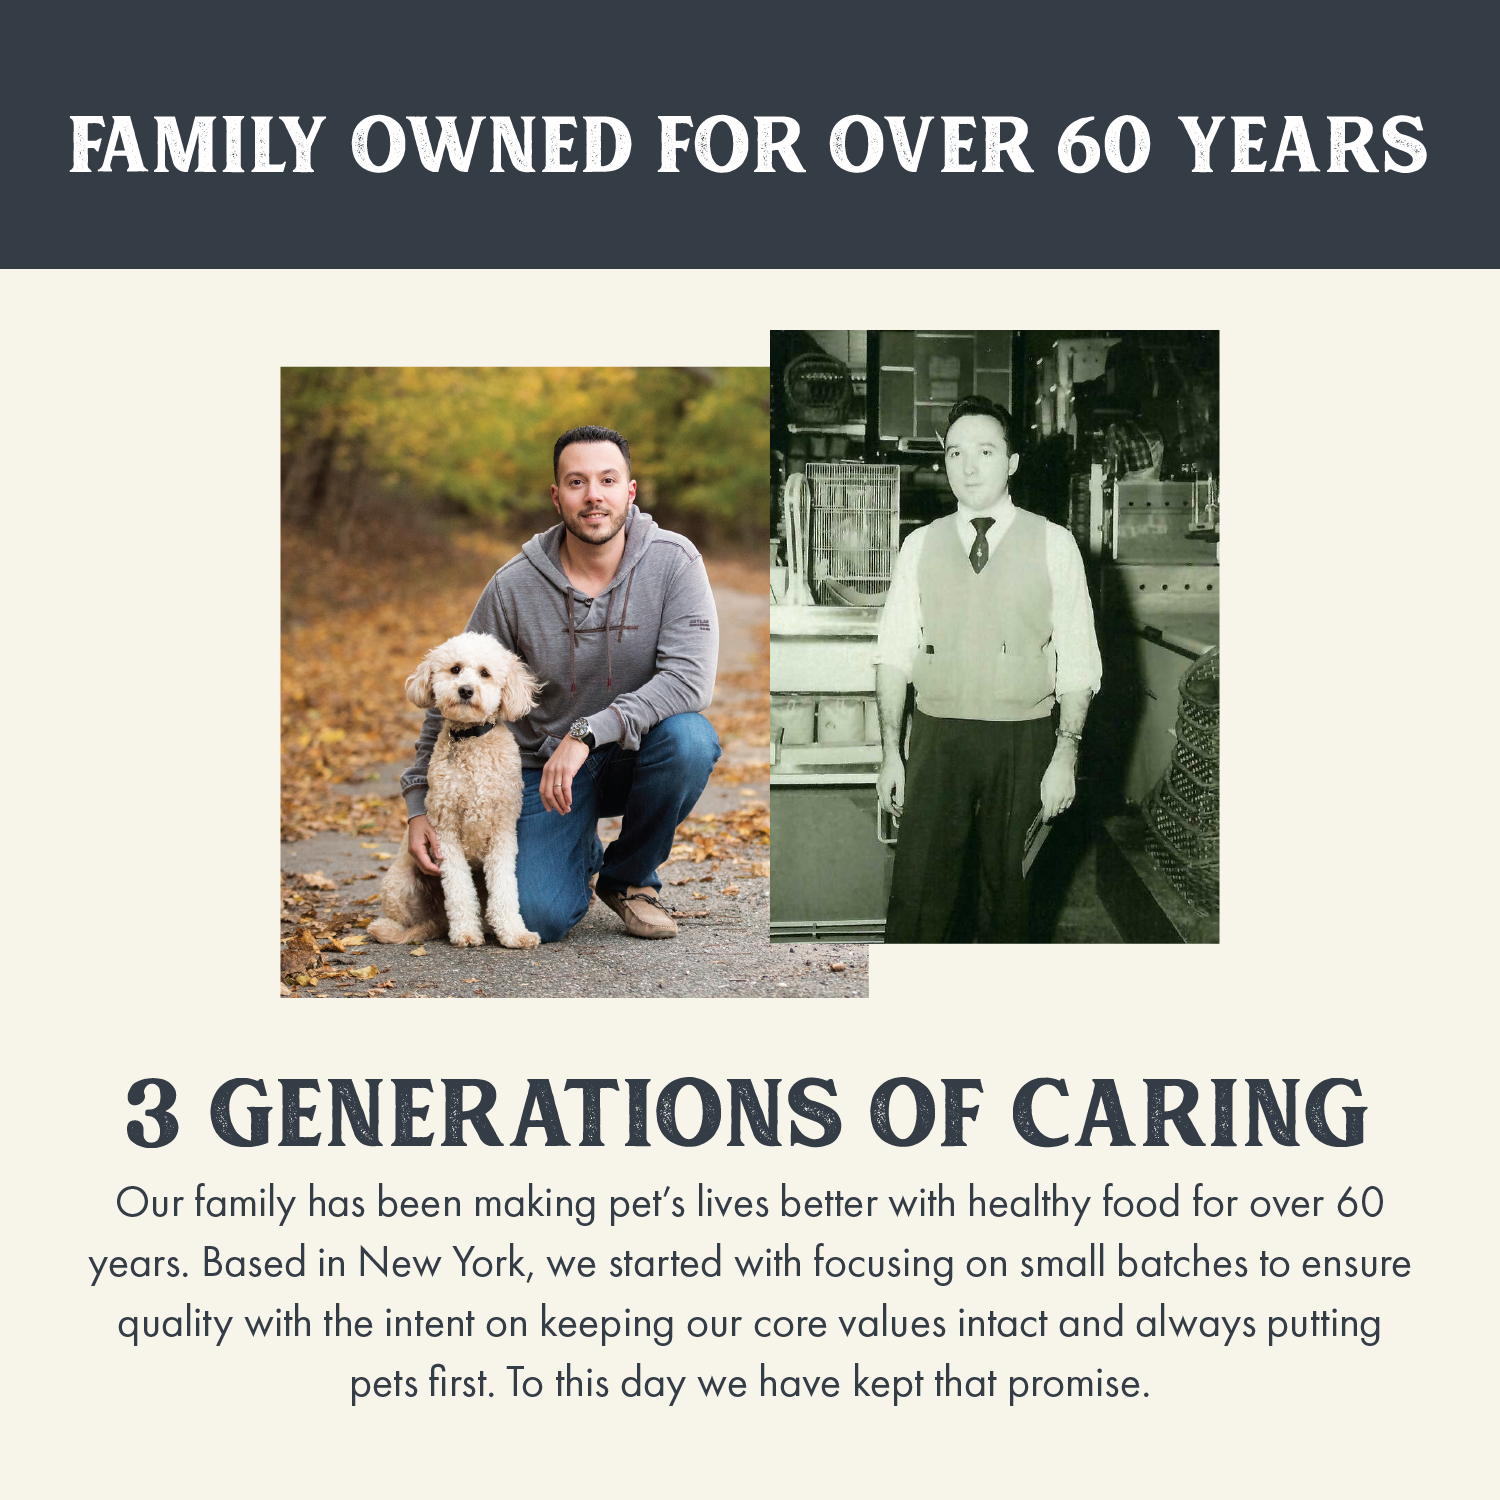 Image celebrating over 60 years of family-owned Health Extension, focusing on pet-first values.